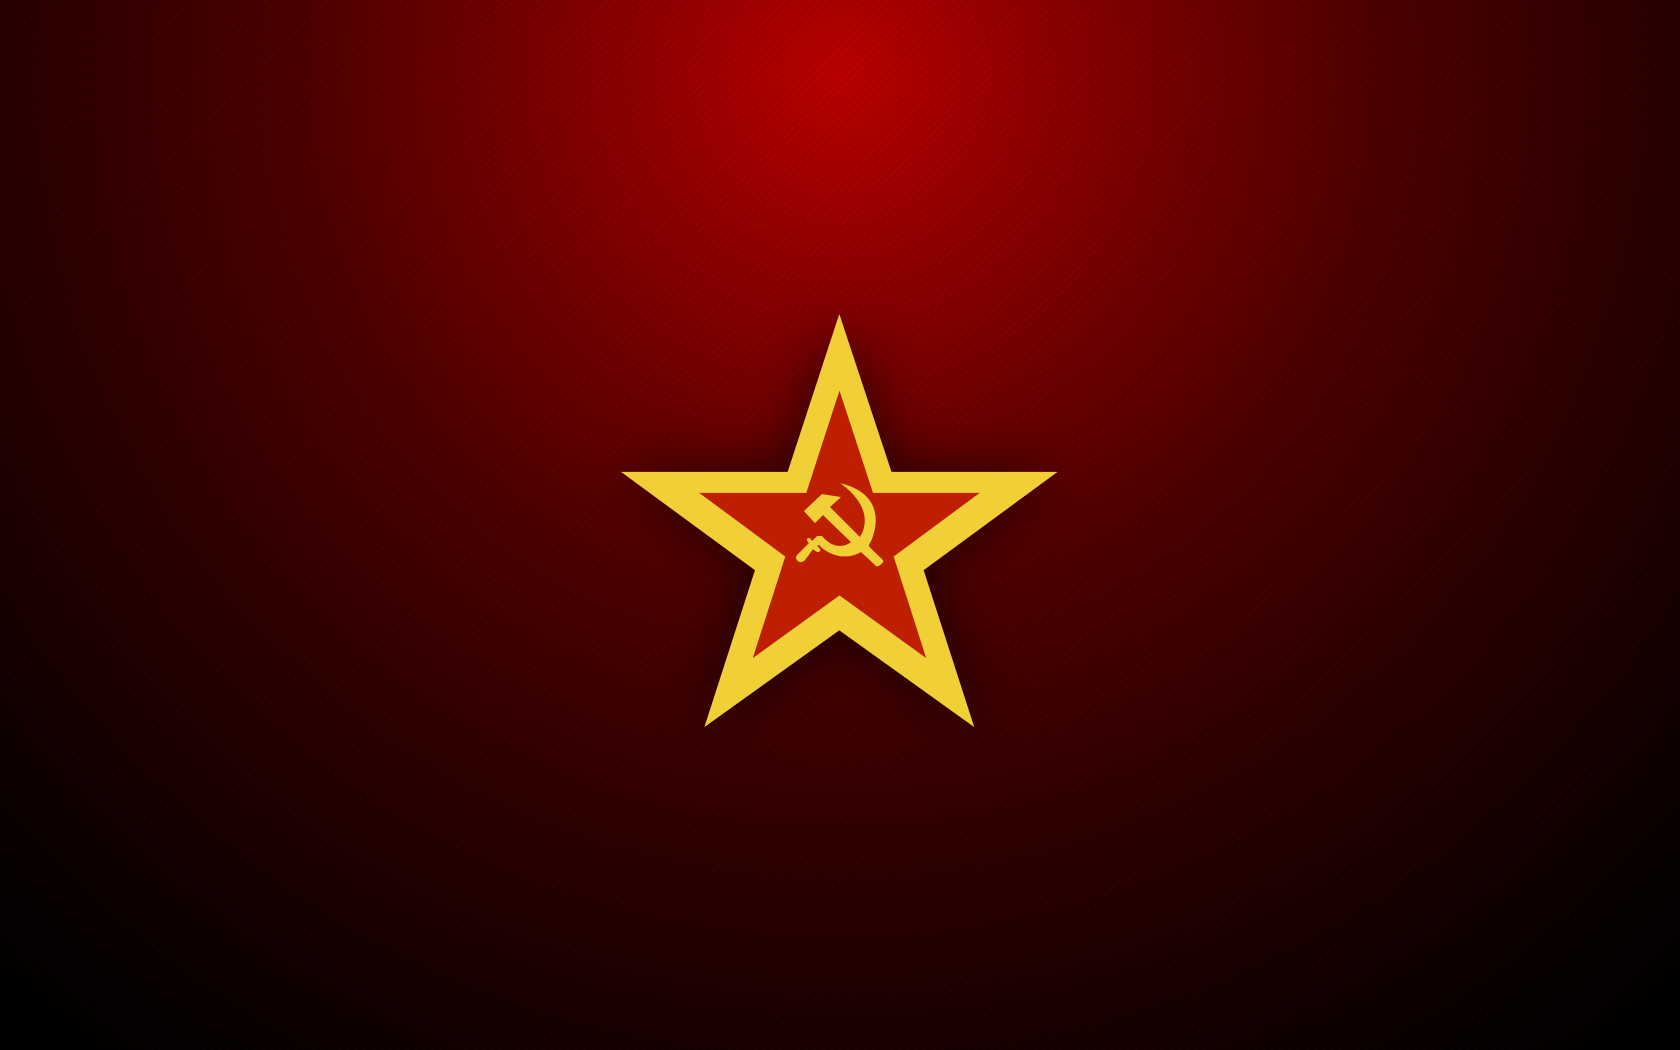 Red Communism Simple Background Minimalism Hammer And Sickle Red Star Gradient World History 1680x1050